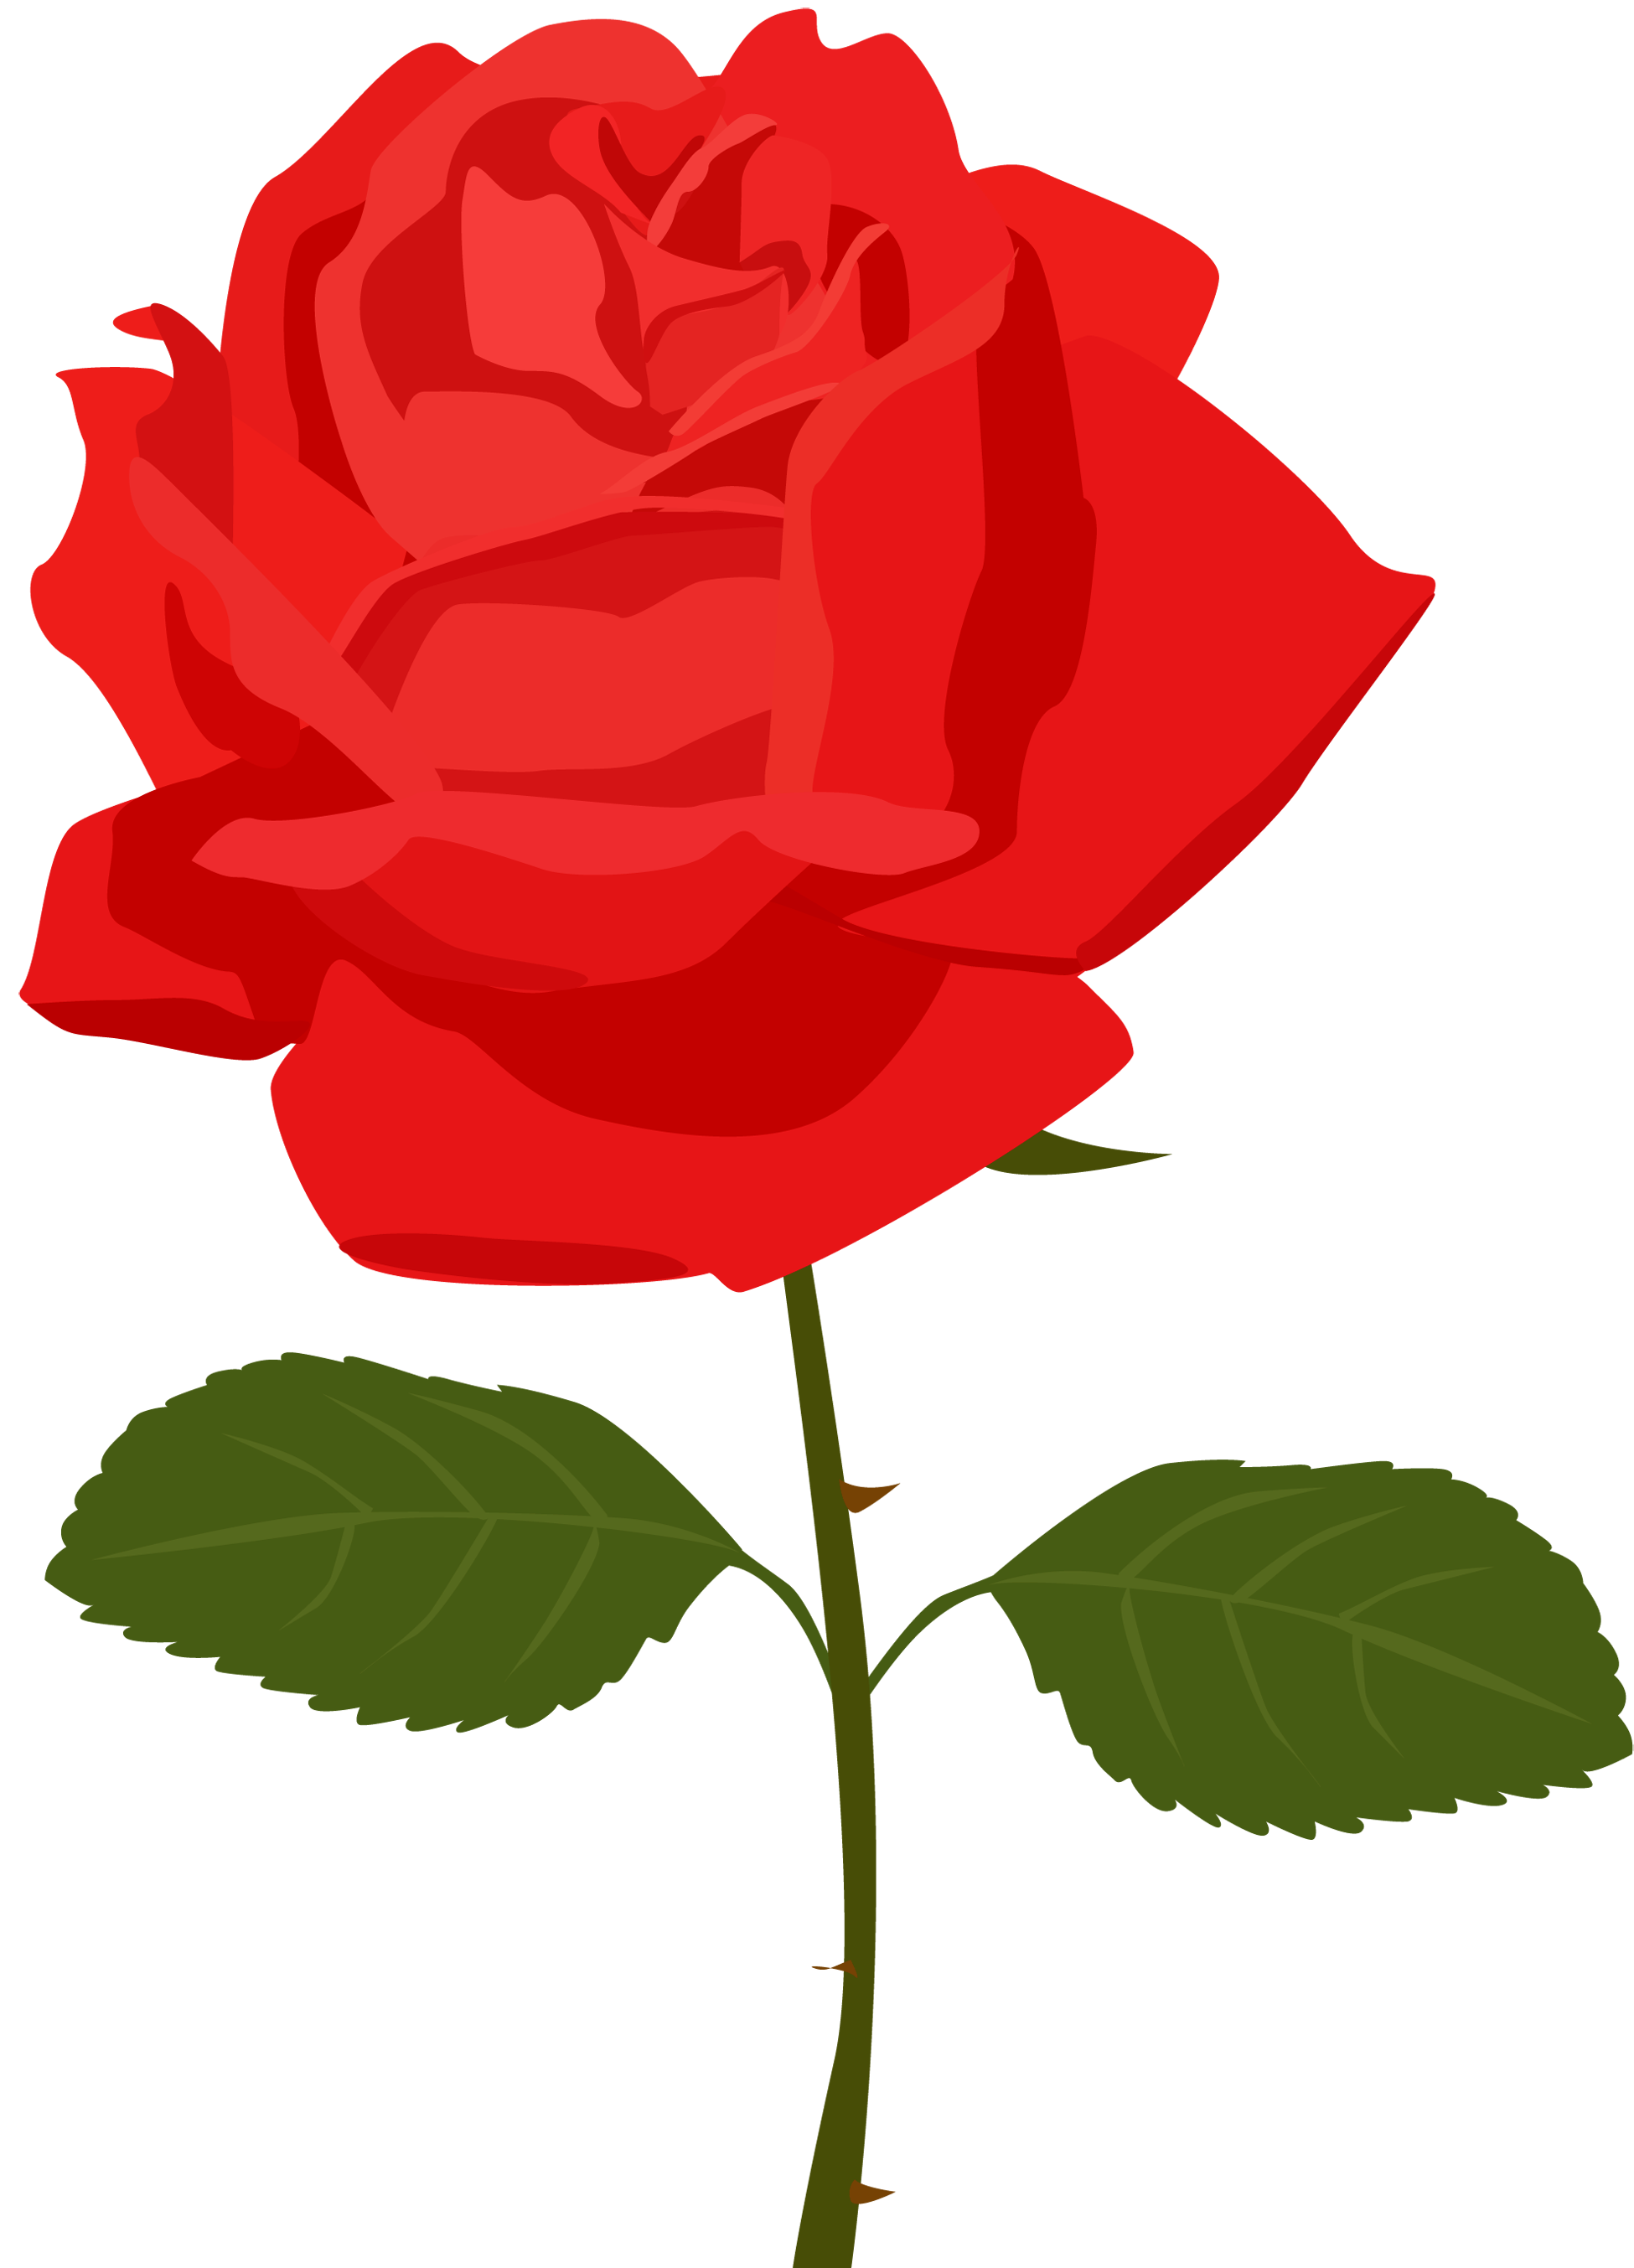 Red Rose Art Picture